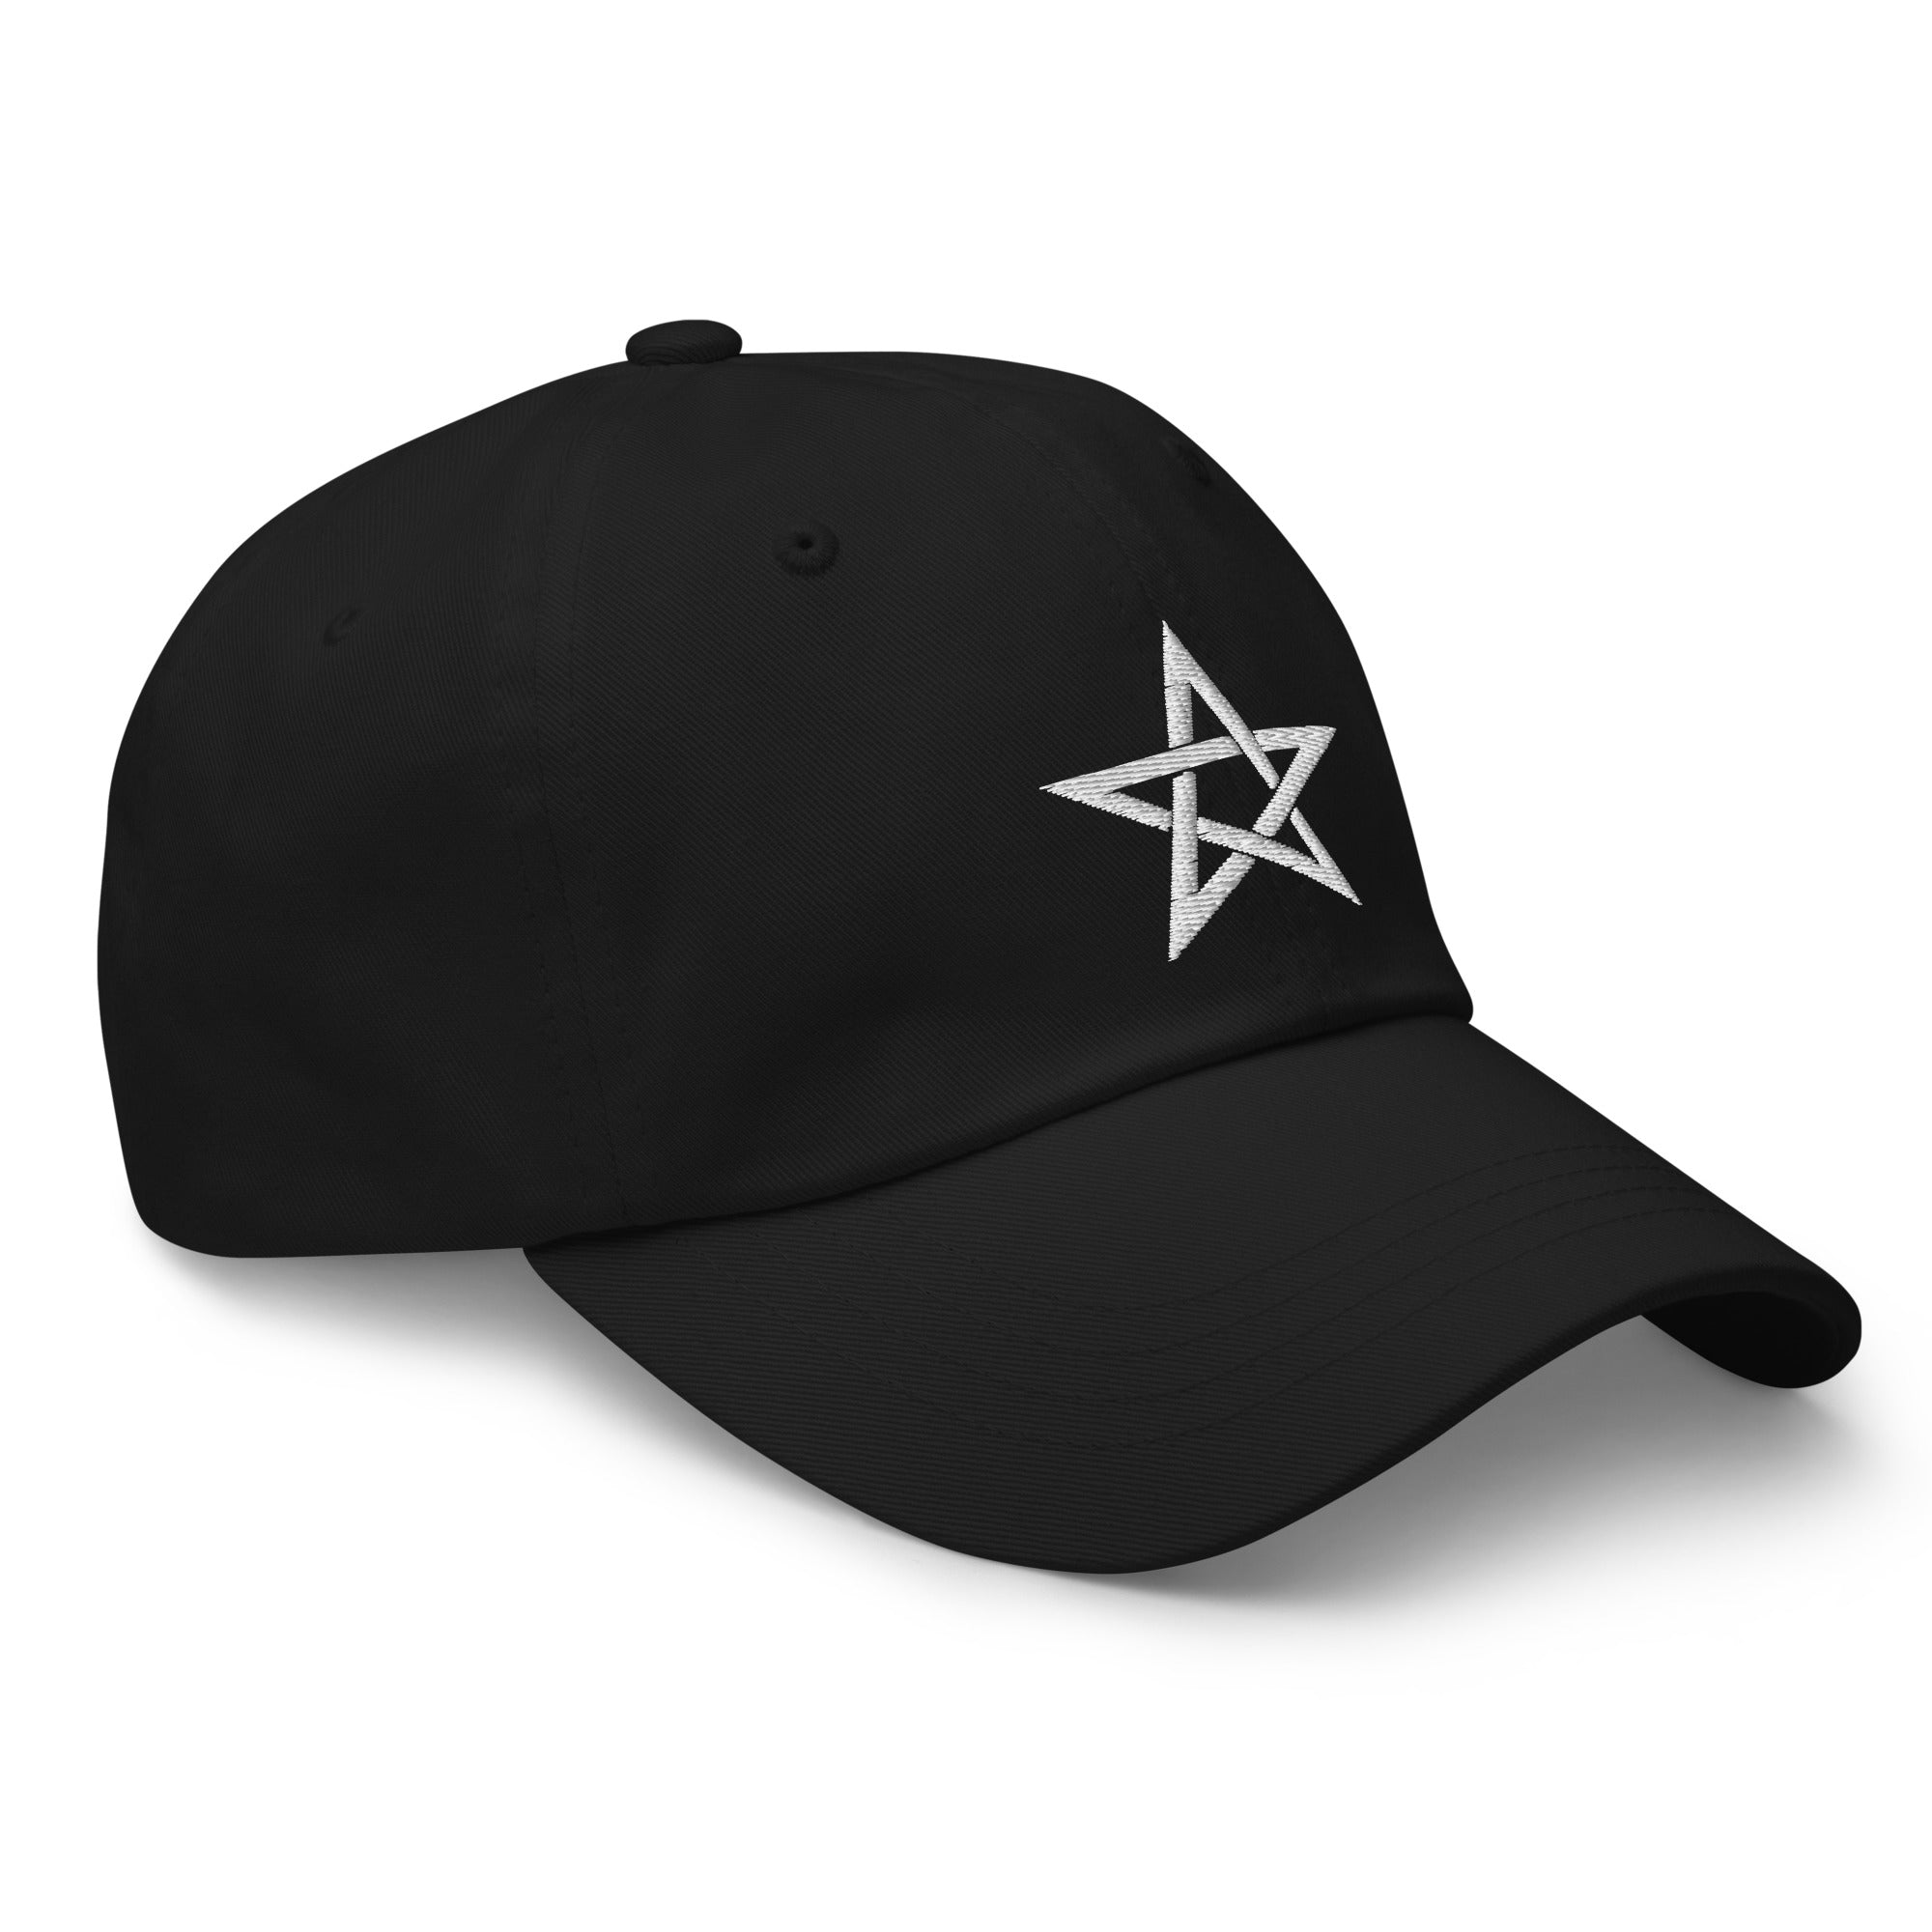 Wiccan Woven Pentagram Symbol Embroidered Baseball Cap 5 Point Star Dad hat - Edge of Life Designs